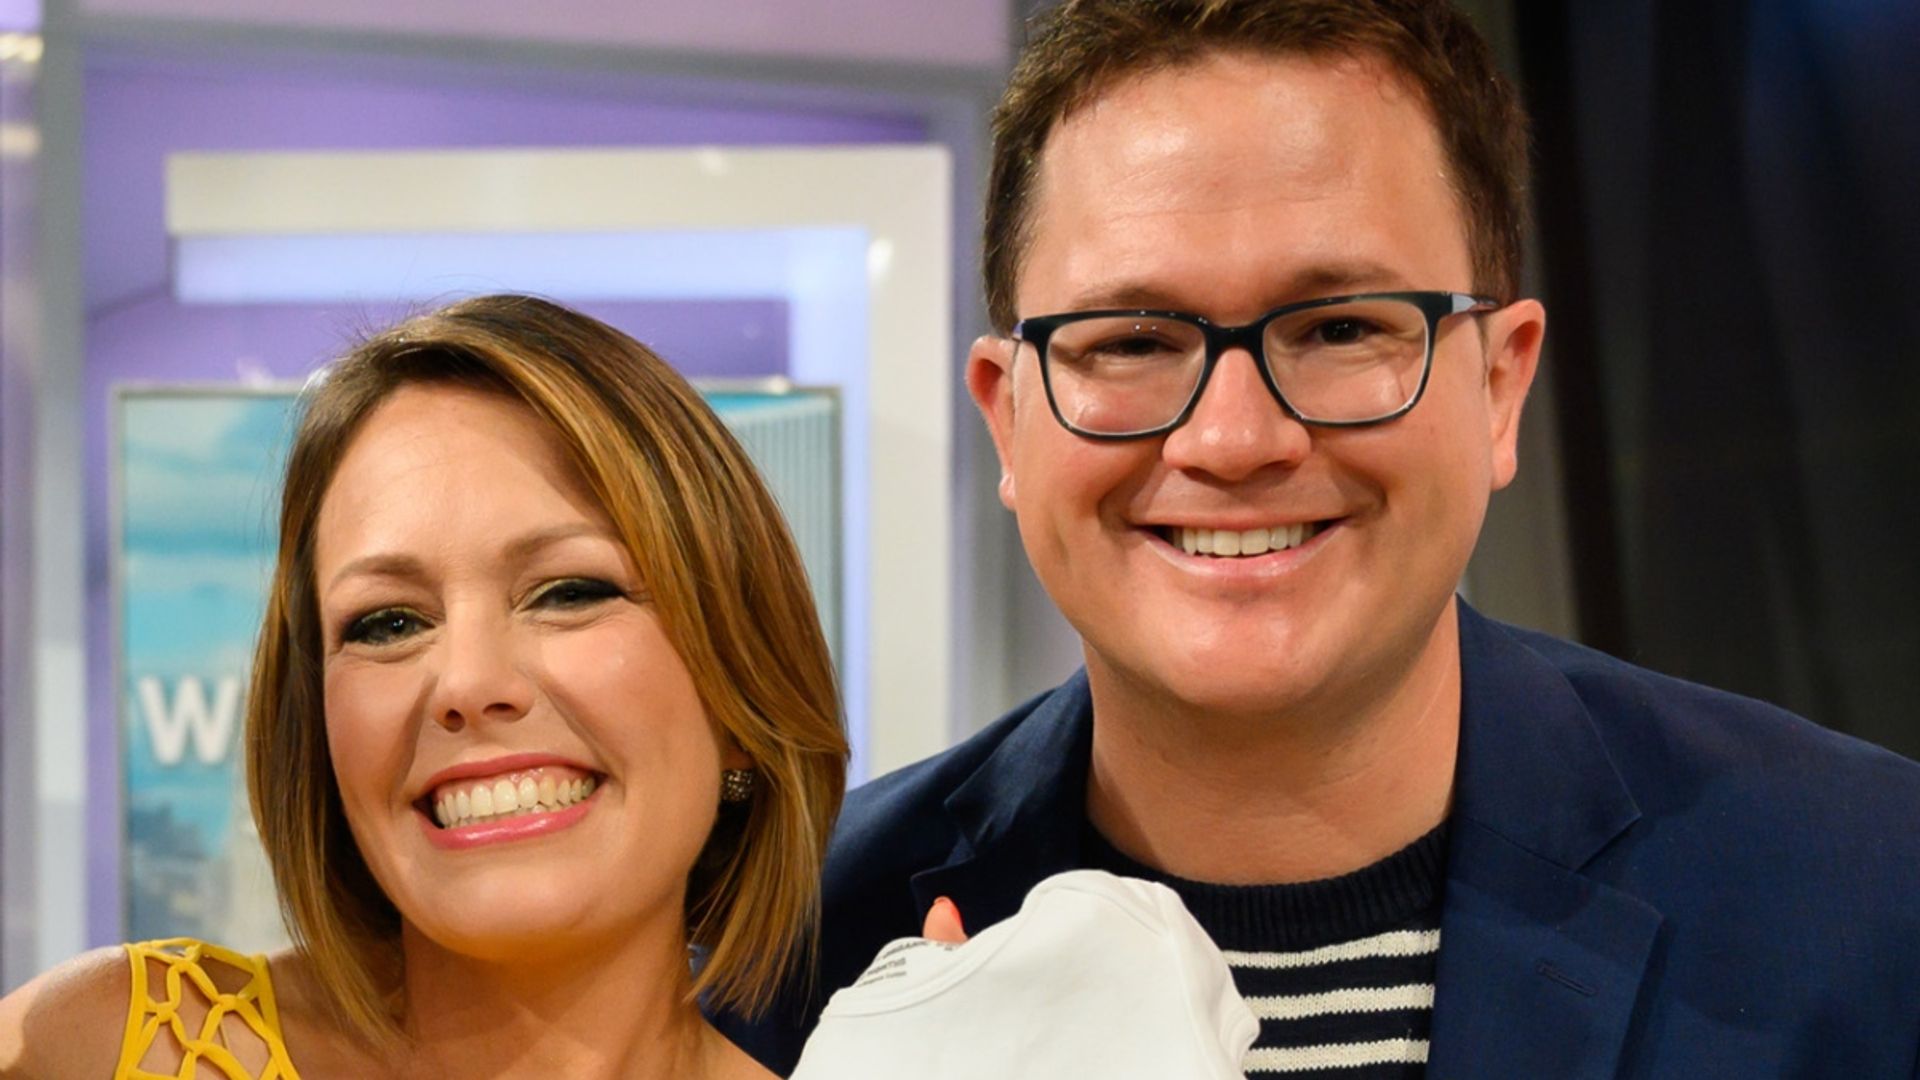 Dylan Dreyer invites fans on special date with husband as they open up about family life